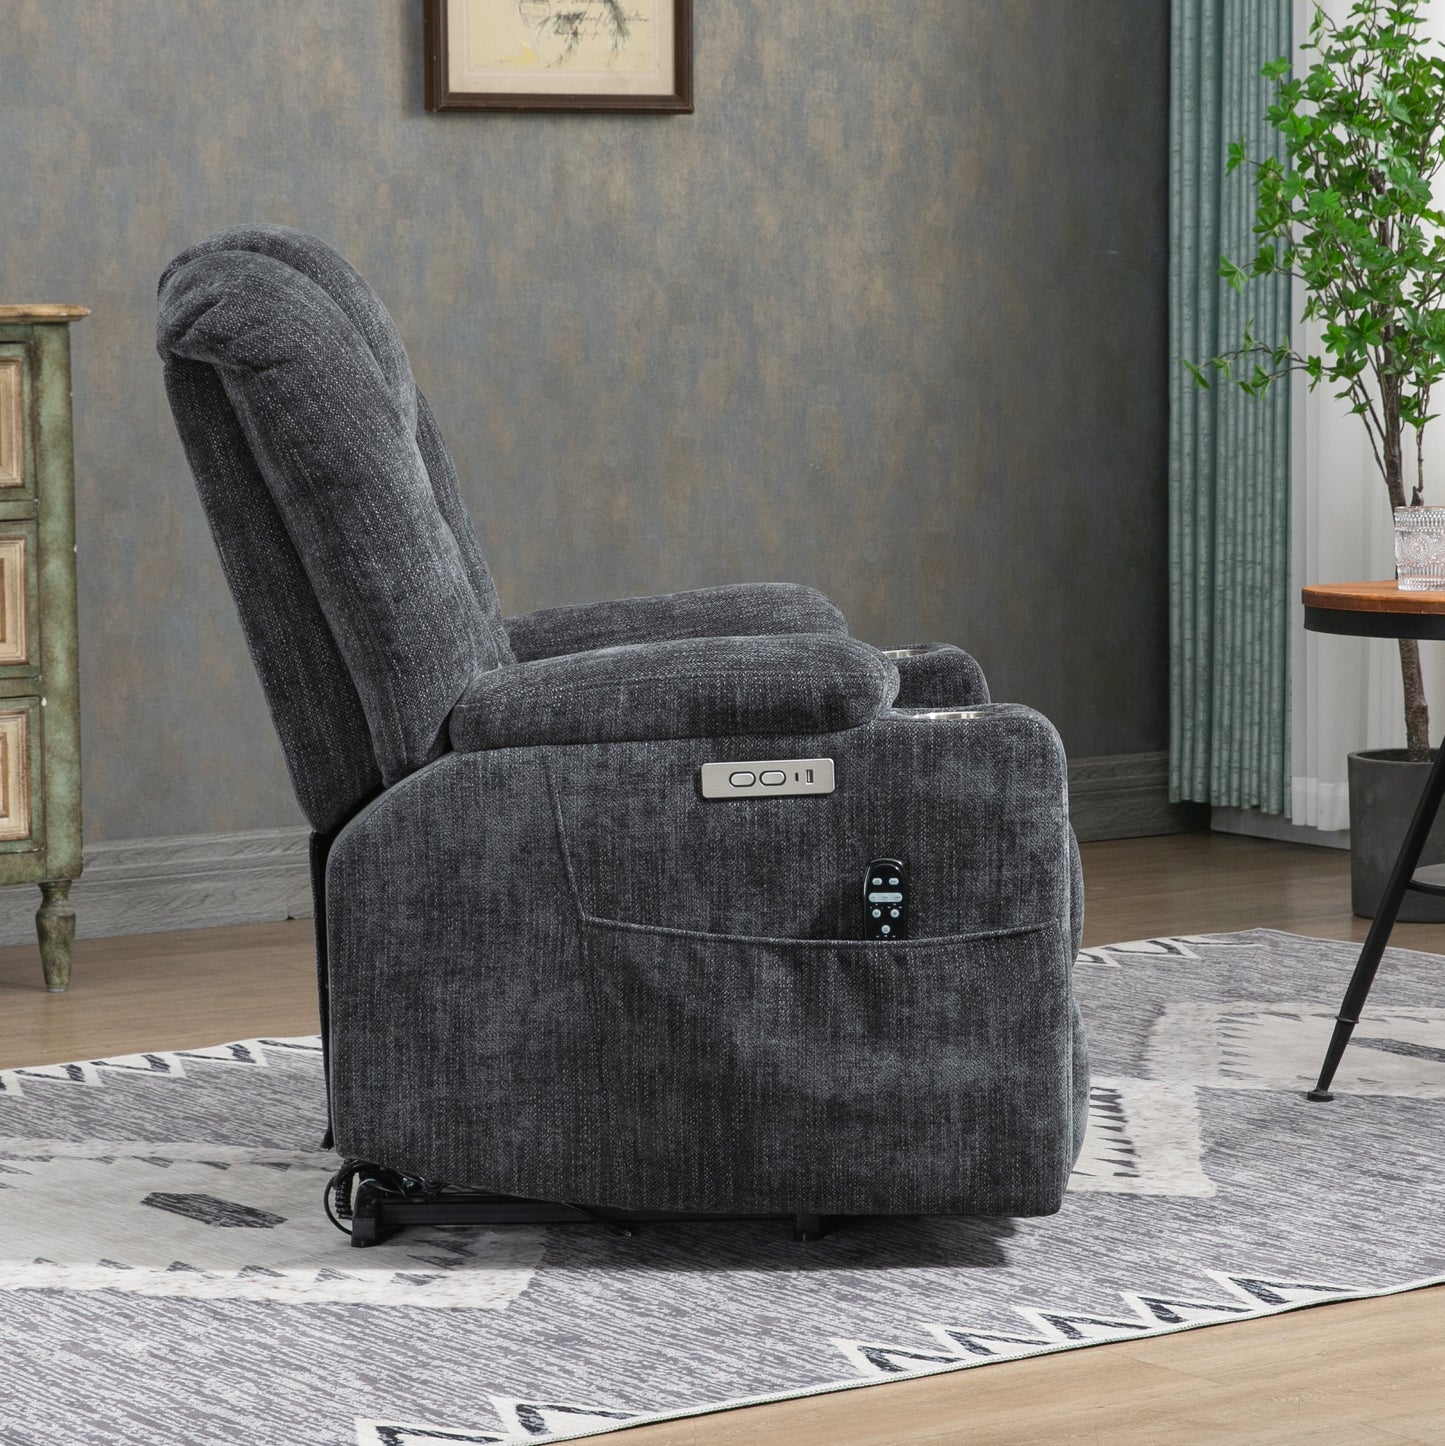 EMON'S Large Power Lift Recliner Chair with Massage and Heat